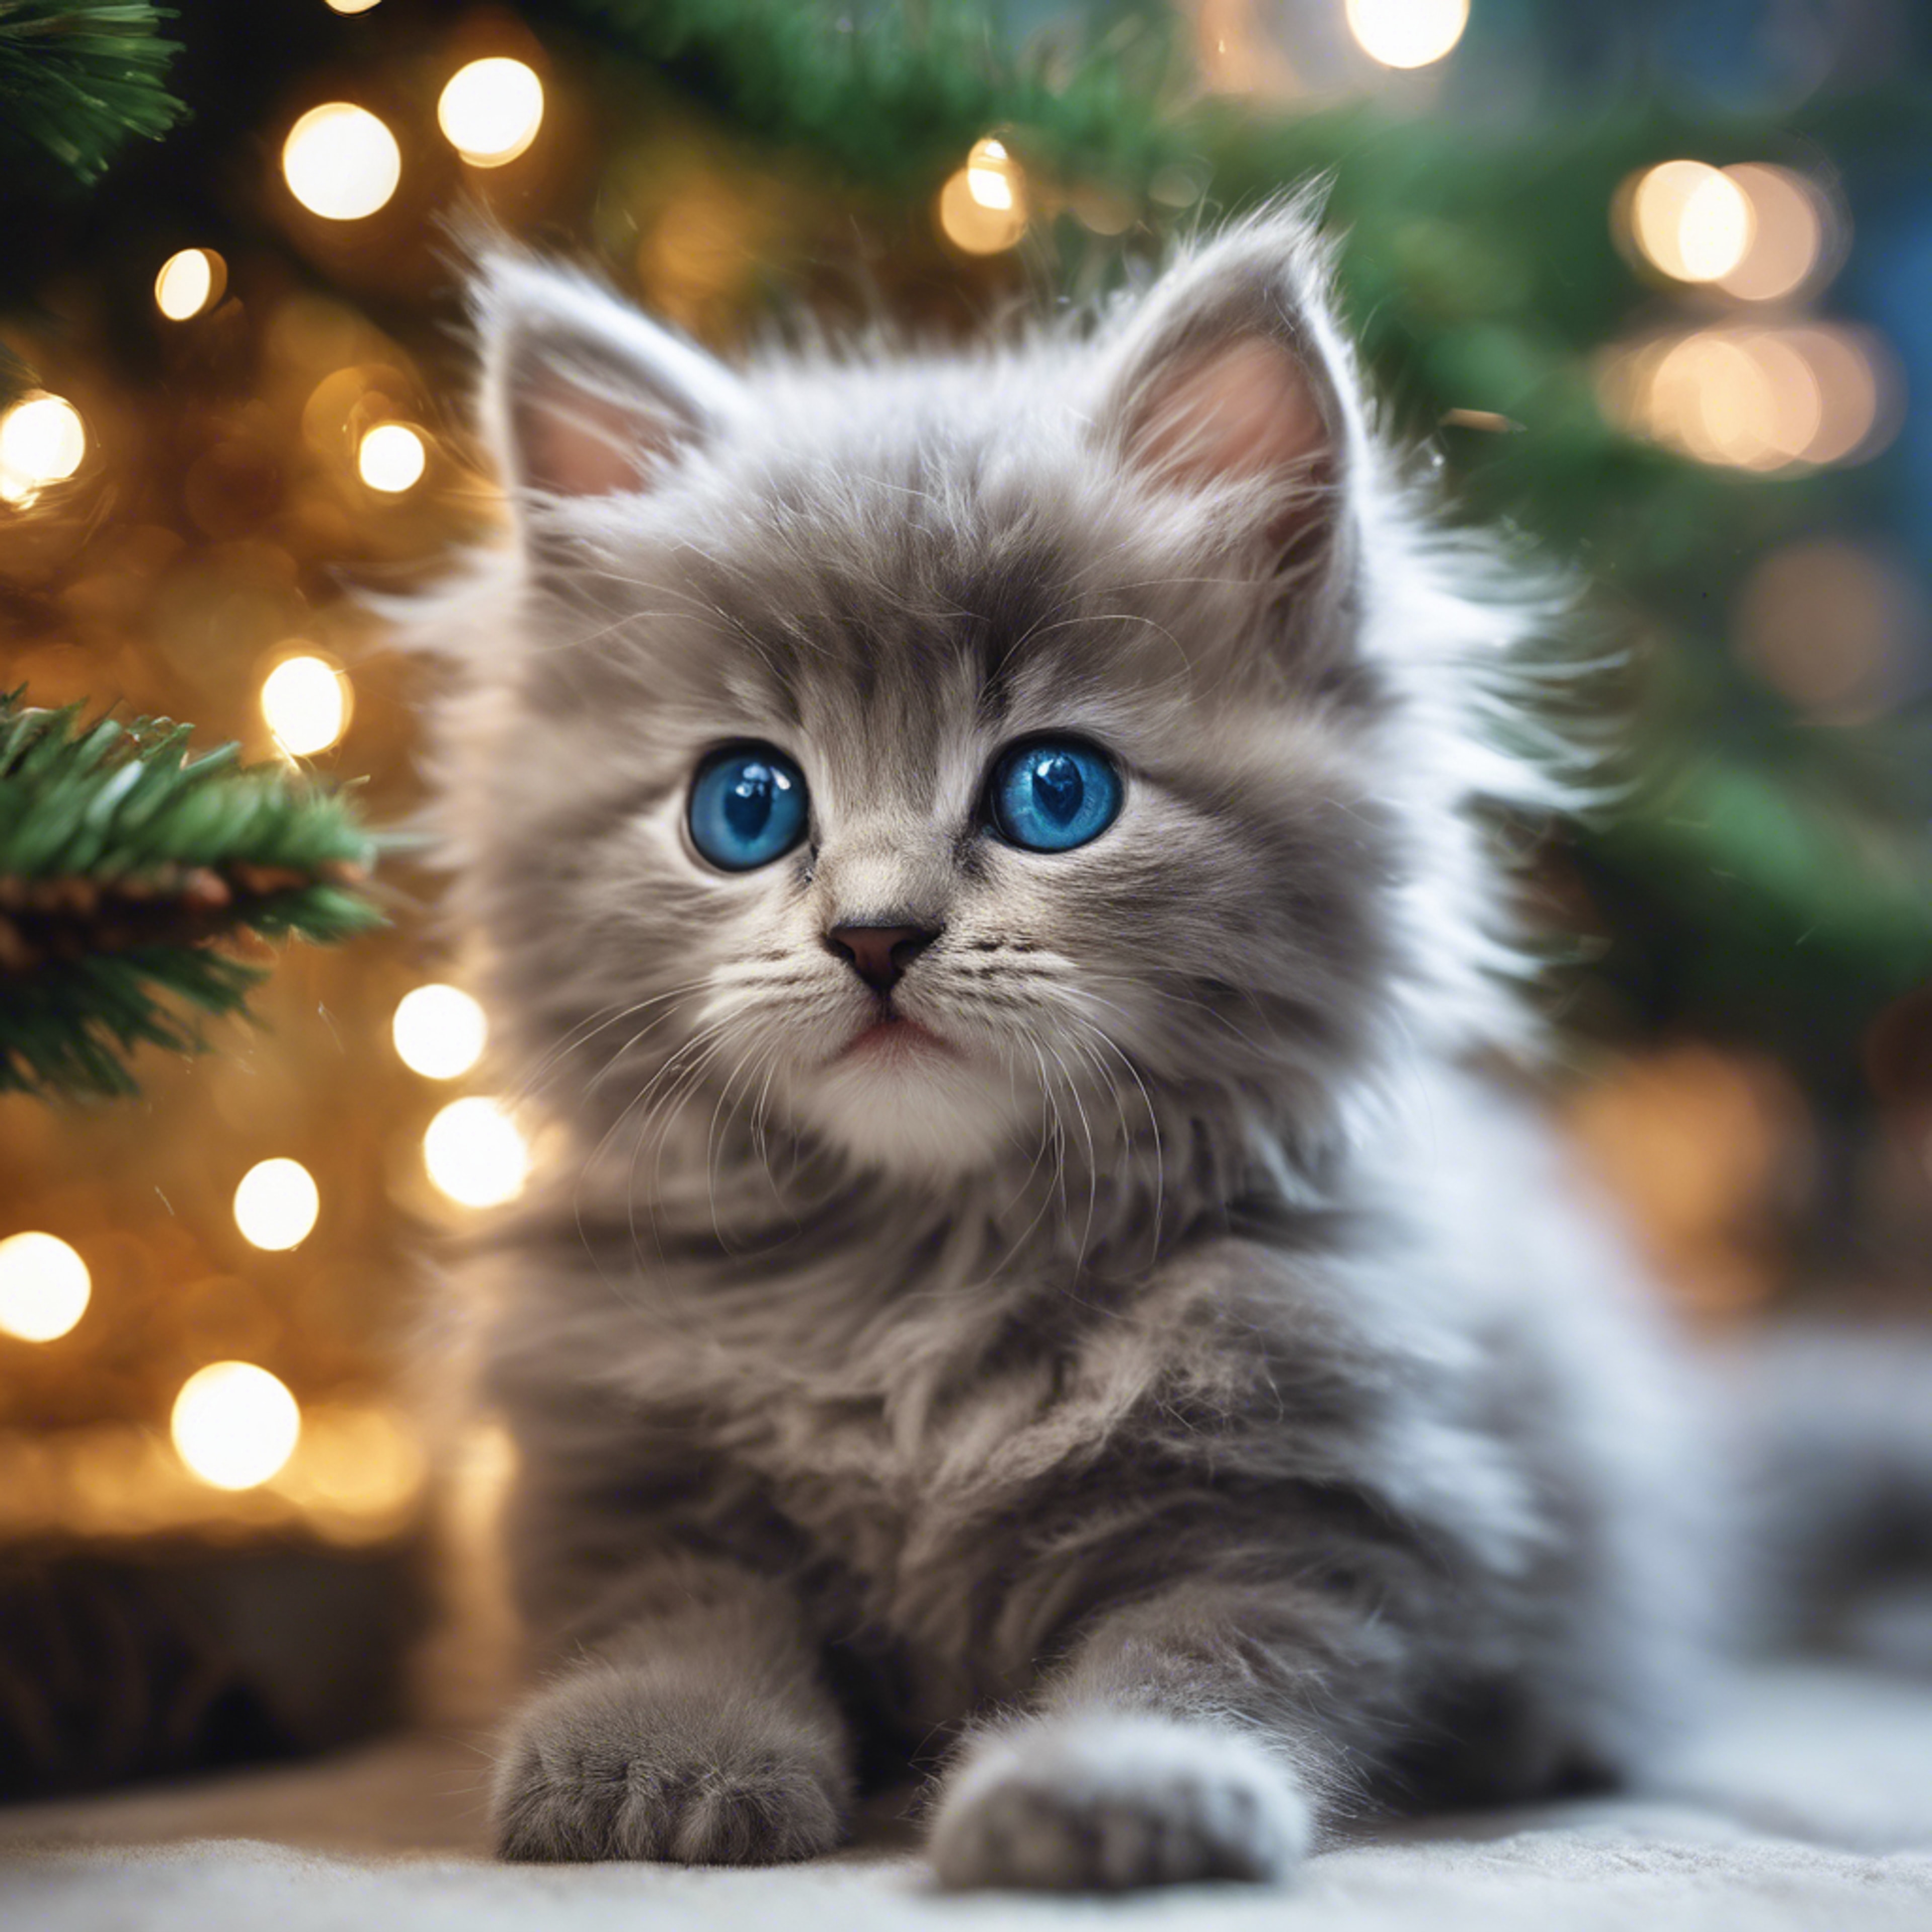 A delightful, gray fluffy kitten with huge blue eyes, sitting near a small Christmas tree. Wallpaper[b831366e38fb4ee39fdf]